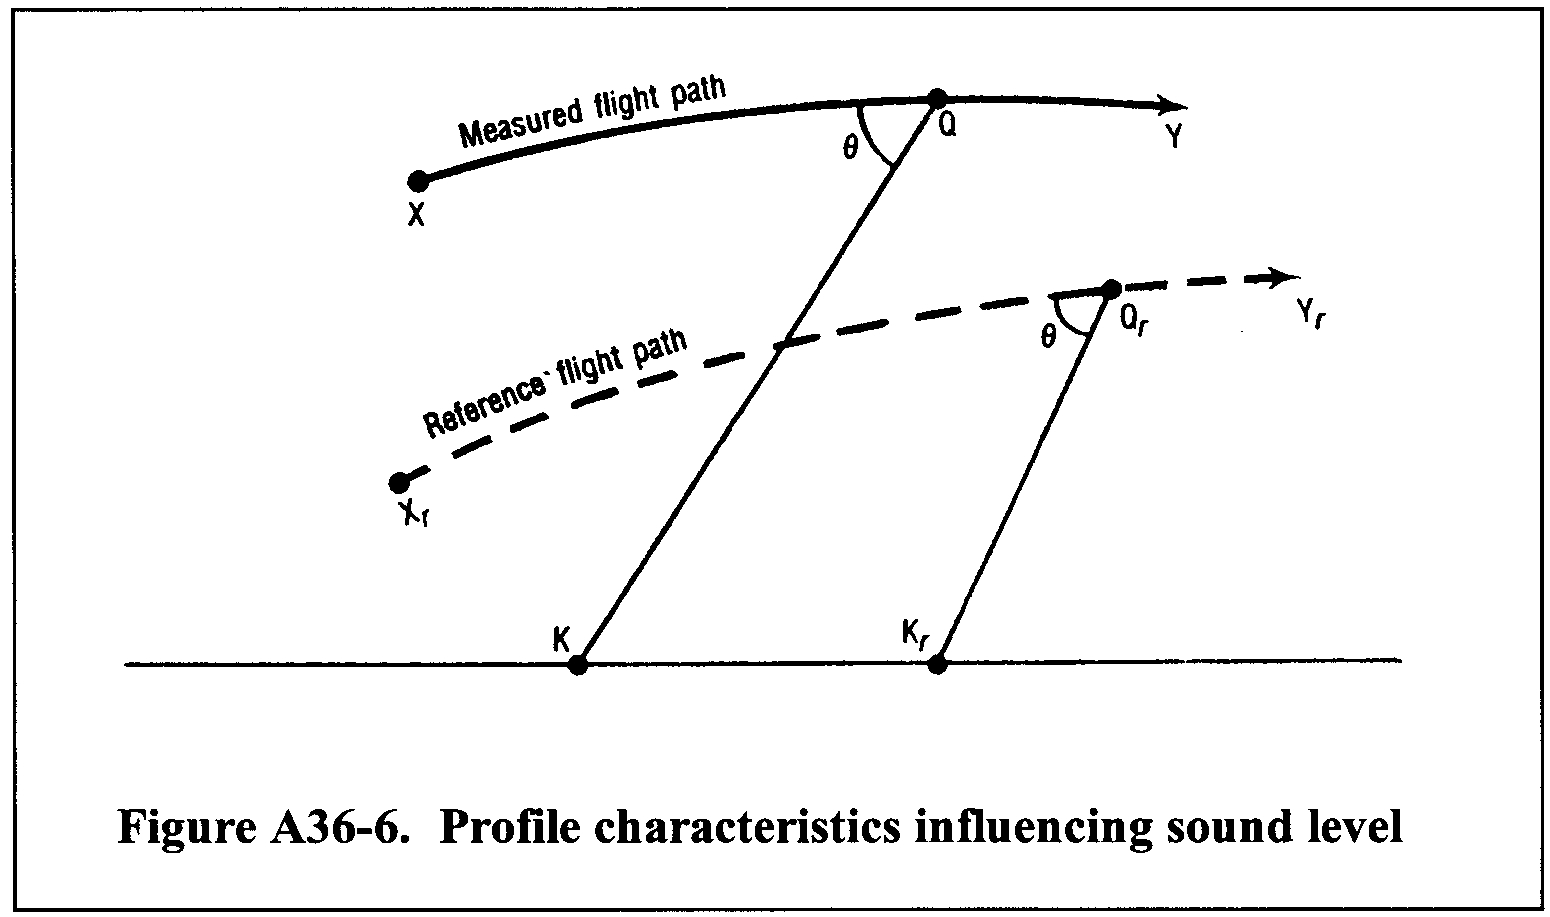 Equation for (2) Q represents the airplane's position on the measured flight path at which the noise was emitted and observed as PNLTM at the noise measuring station K. Qr is the corresponding position on the reference flight path, and Kr the reference measuring station. QK and QrKr are, respectively, the measured